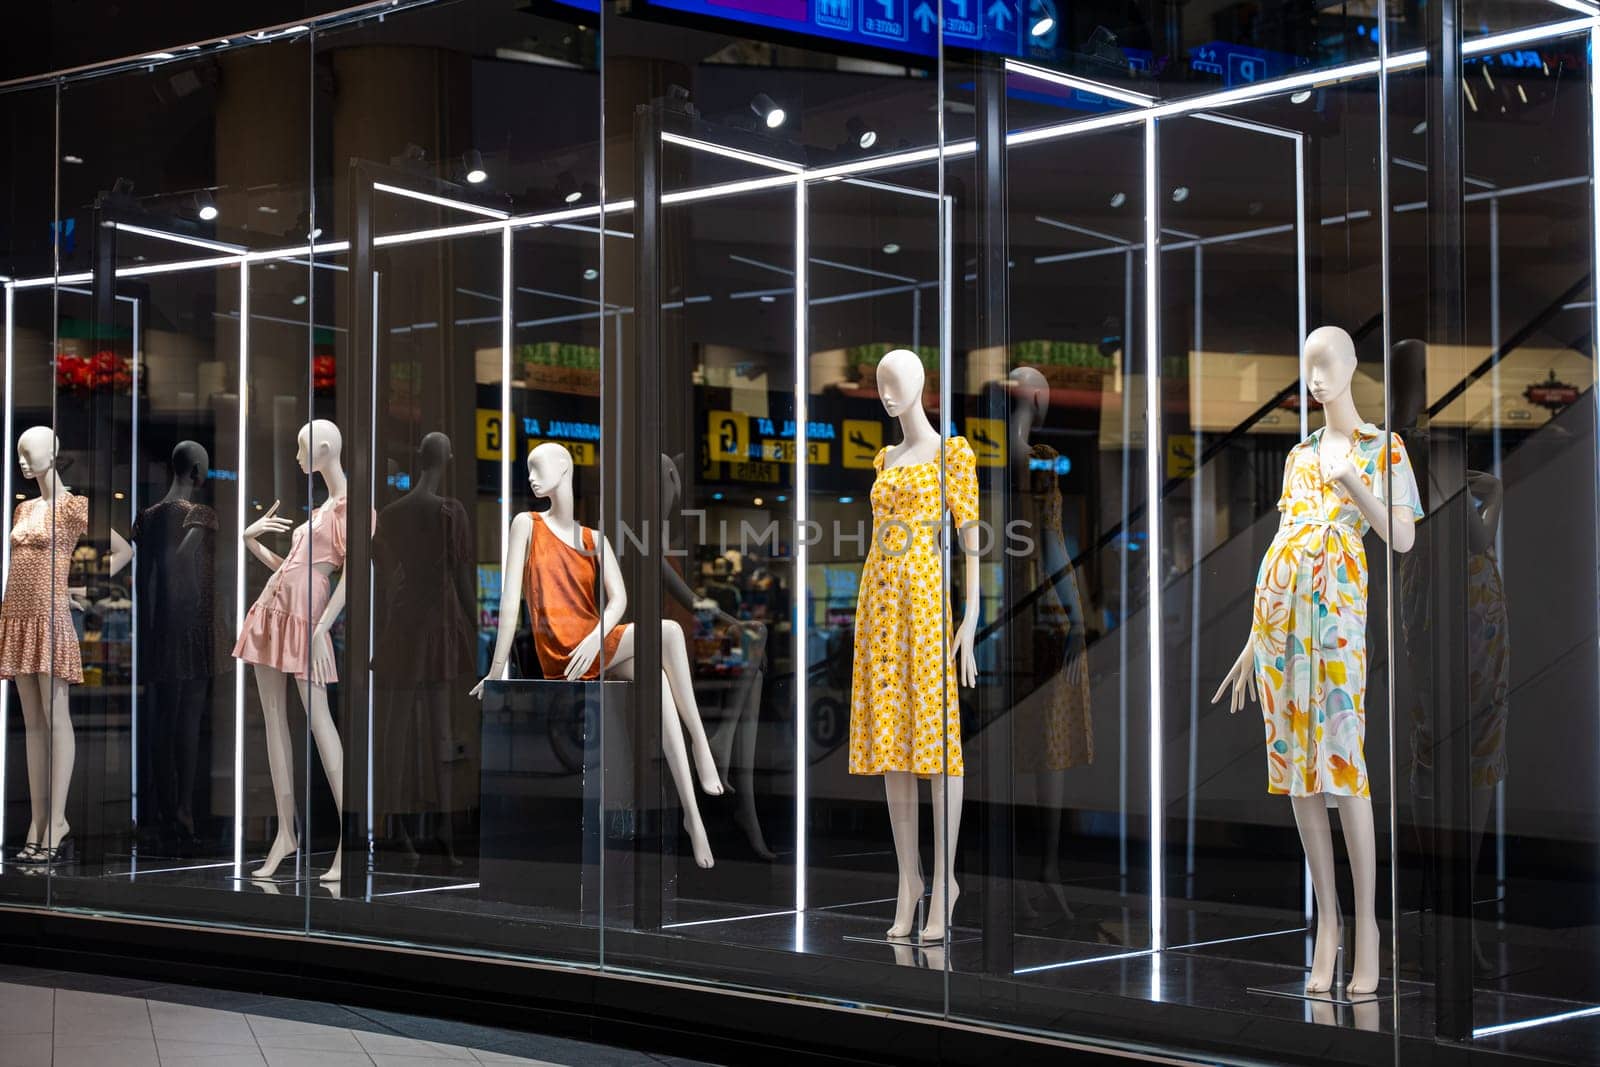 Colorful and artistic mannequins in a store display case by Sorapop